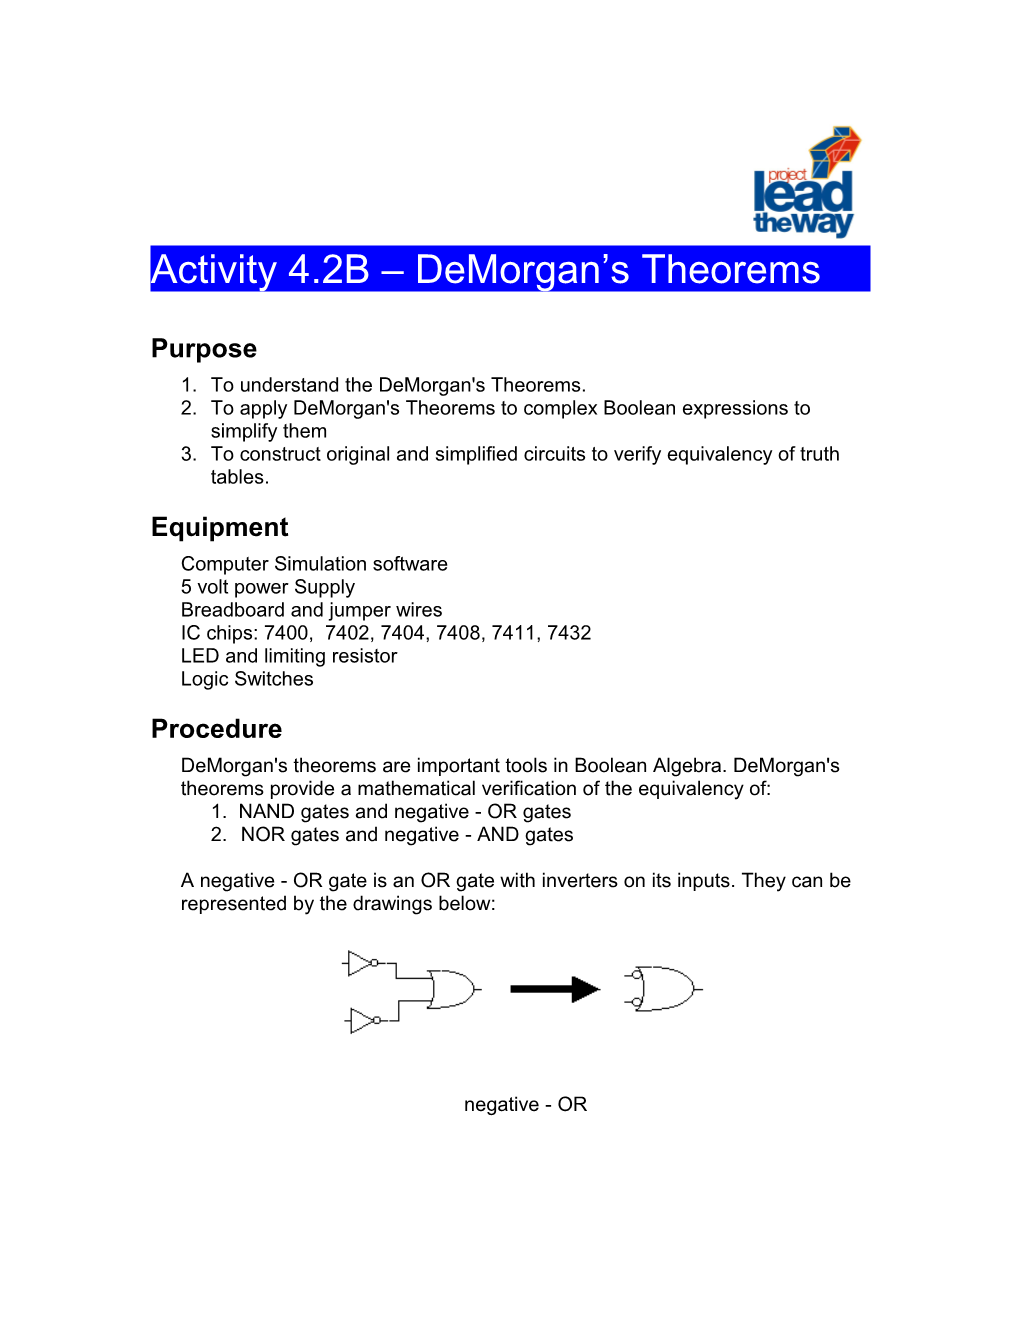 1.To Understand the Demorgan's Theorems